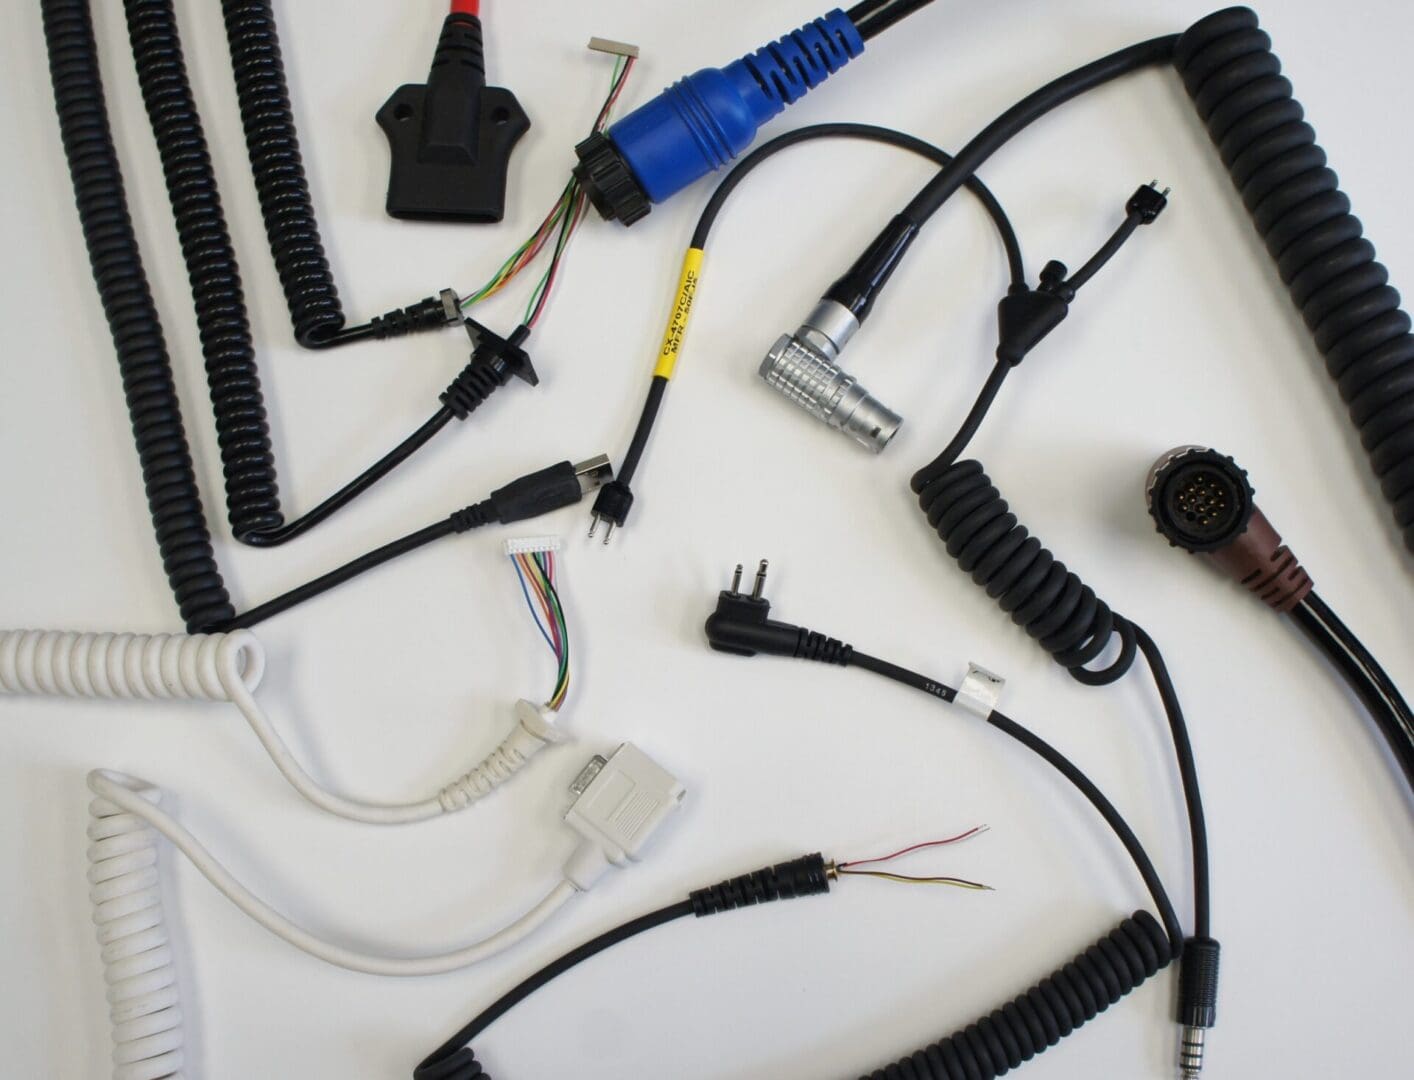 A variety of wires and cables, showcasing their cable capabilities, are laid out on a white surface.